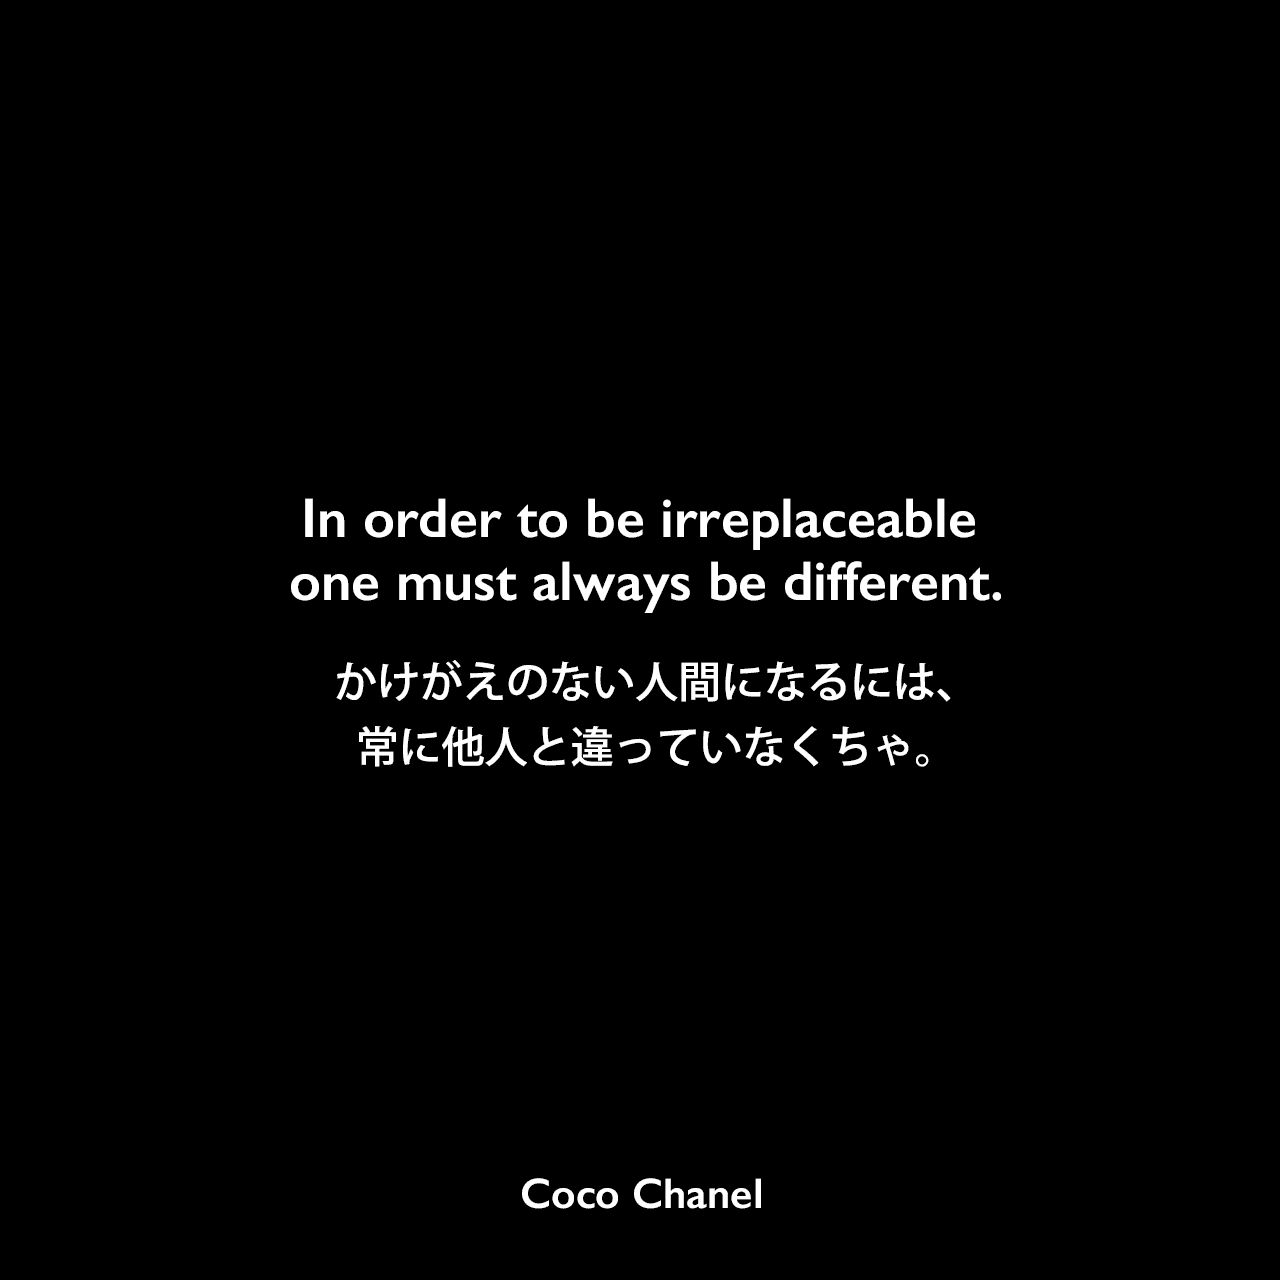 In order to be irreplaceable one must always be different.かけがえのない人間になるには、常に他人と違っていなくちゃ。- マルセル・ヘードリッヒの本「Coco Chanel : Her Life, Her Secrets」よりCoco Chanel